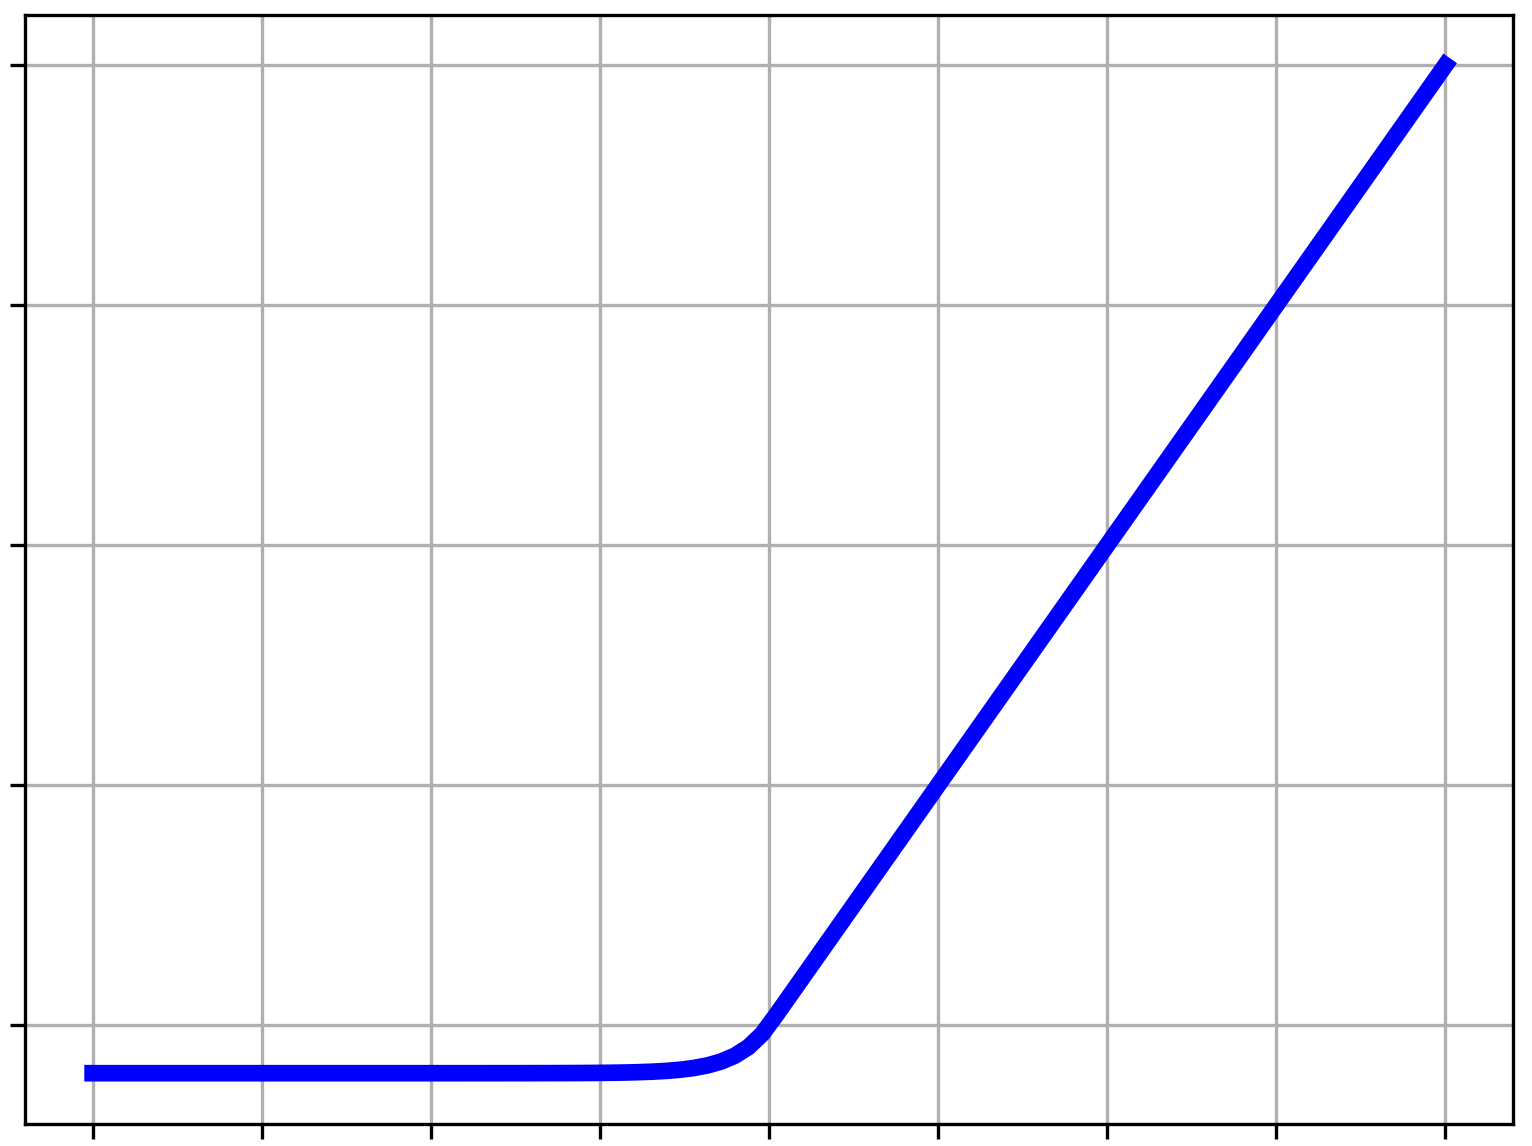 Scaled Exponential Linear Unit activation function chart